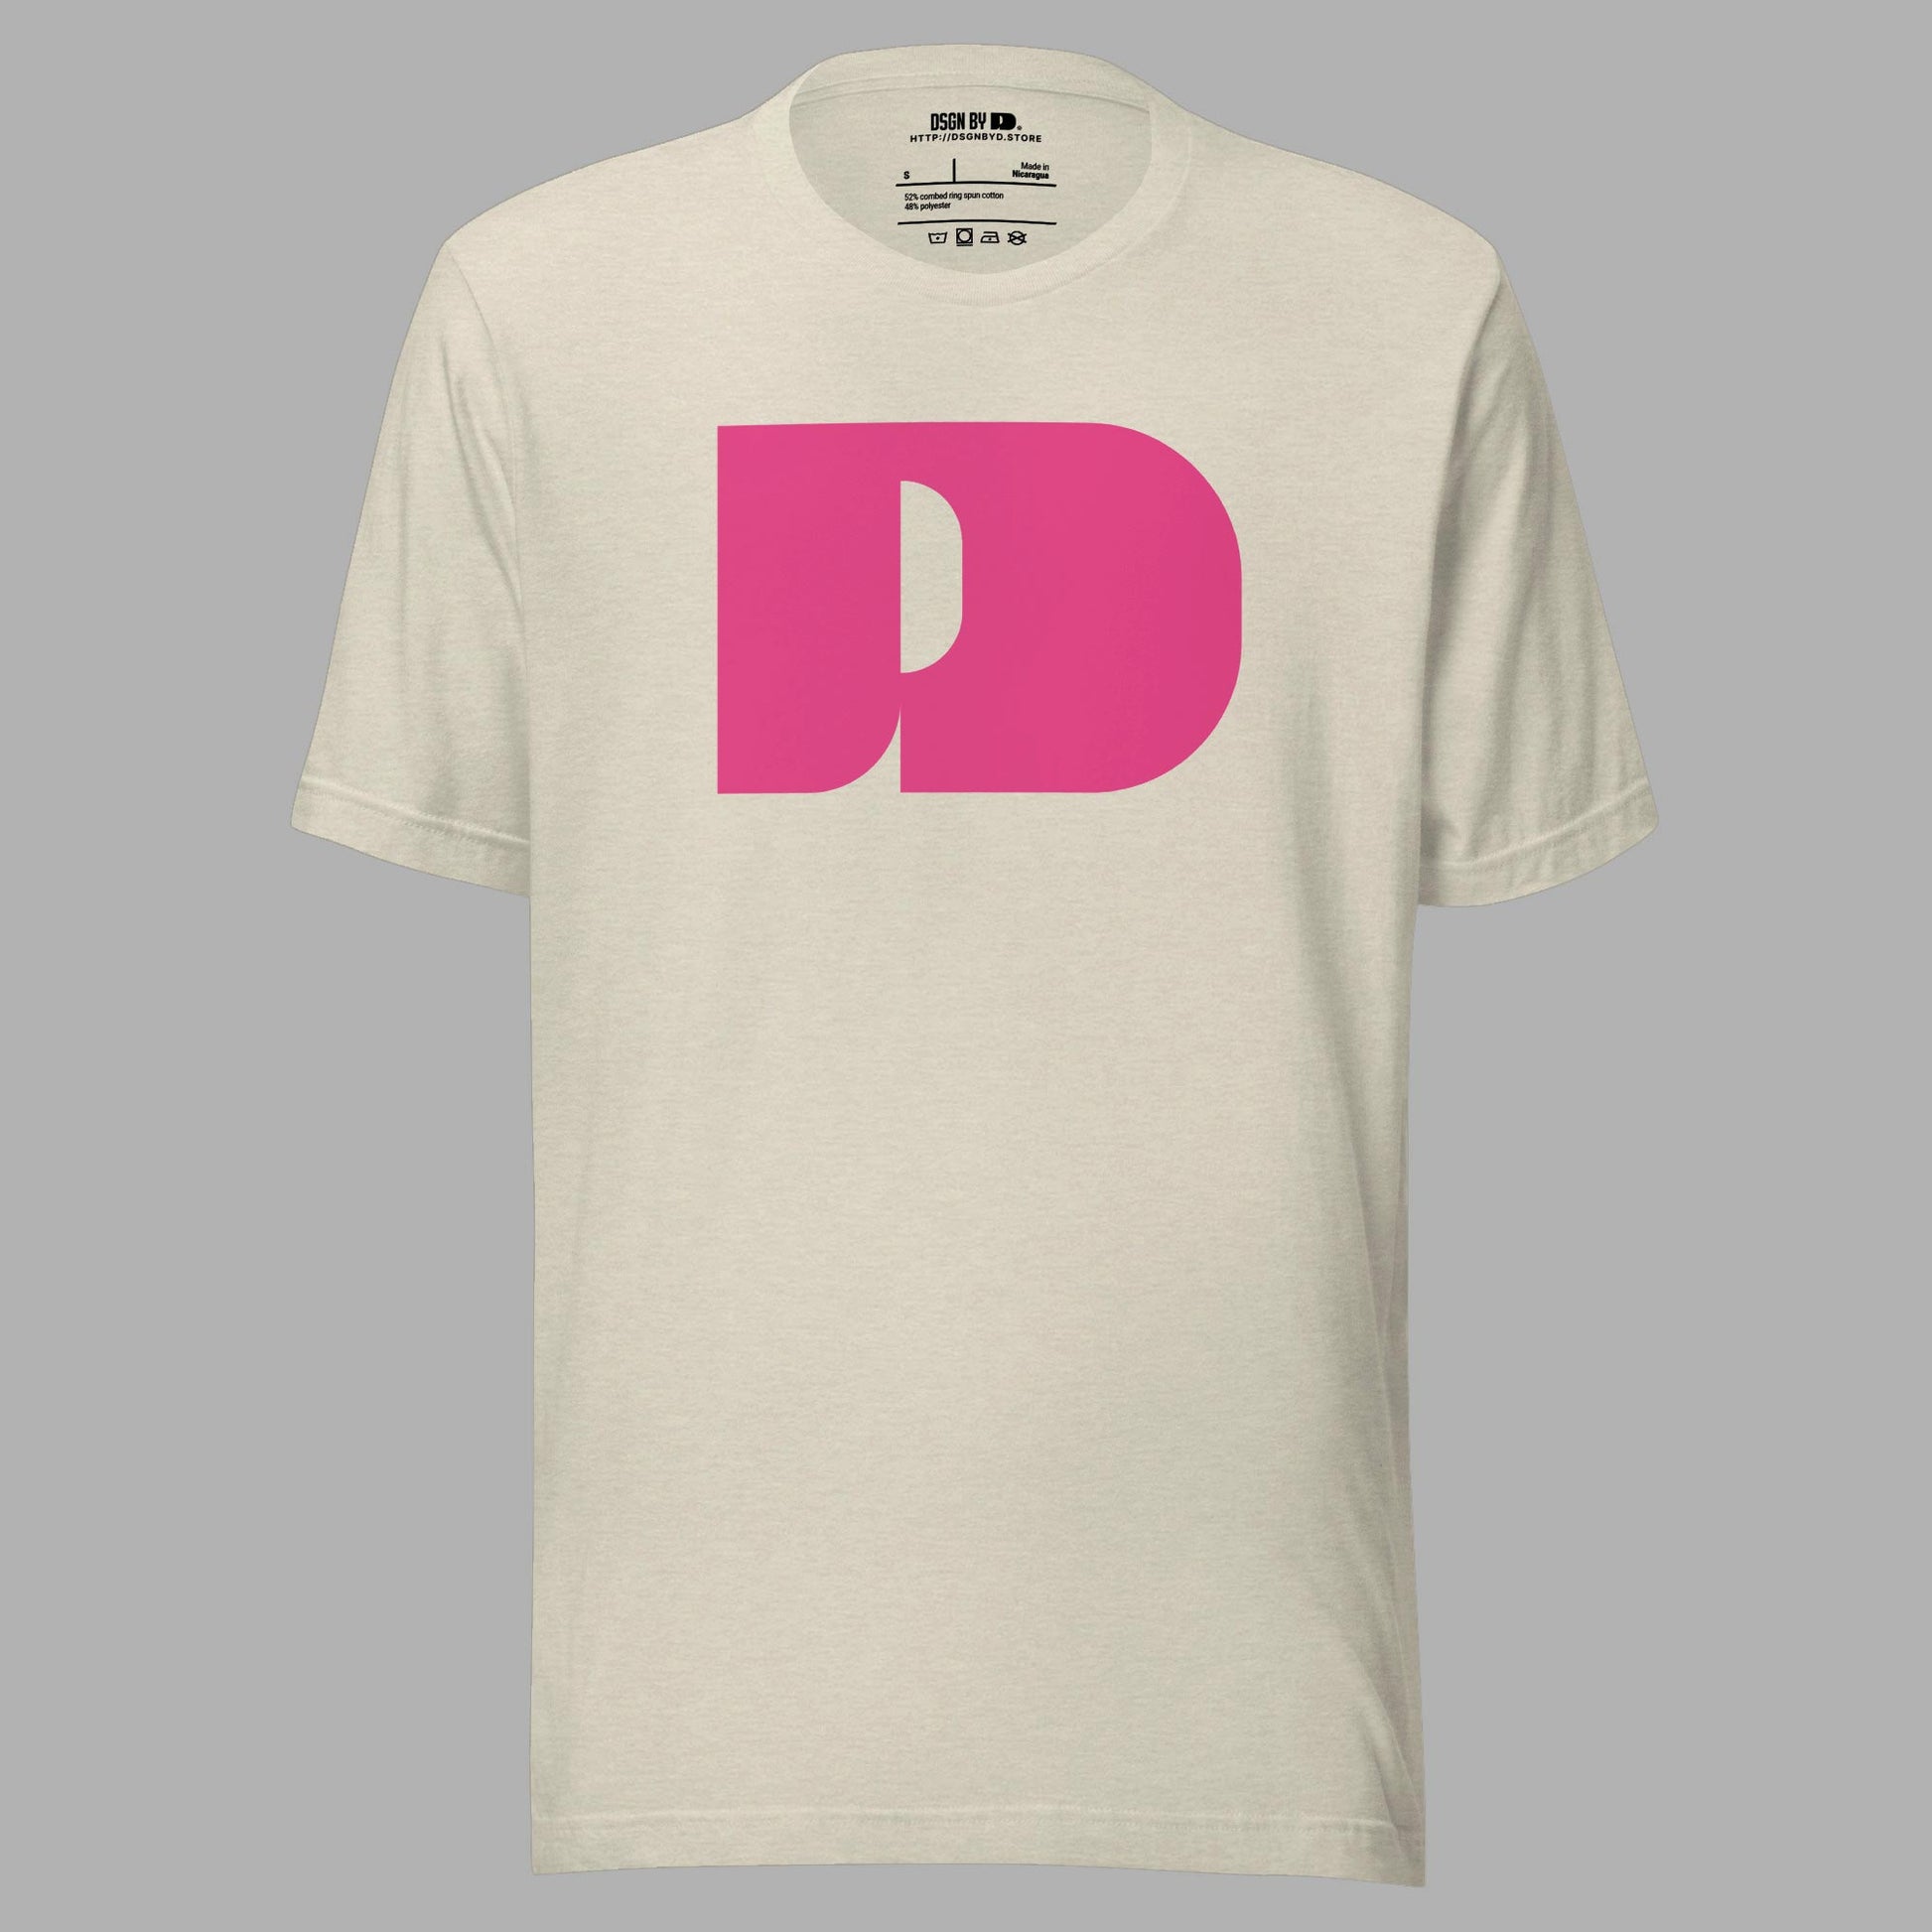 A beige cotton unisex graphic tee with letter D .